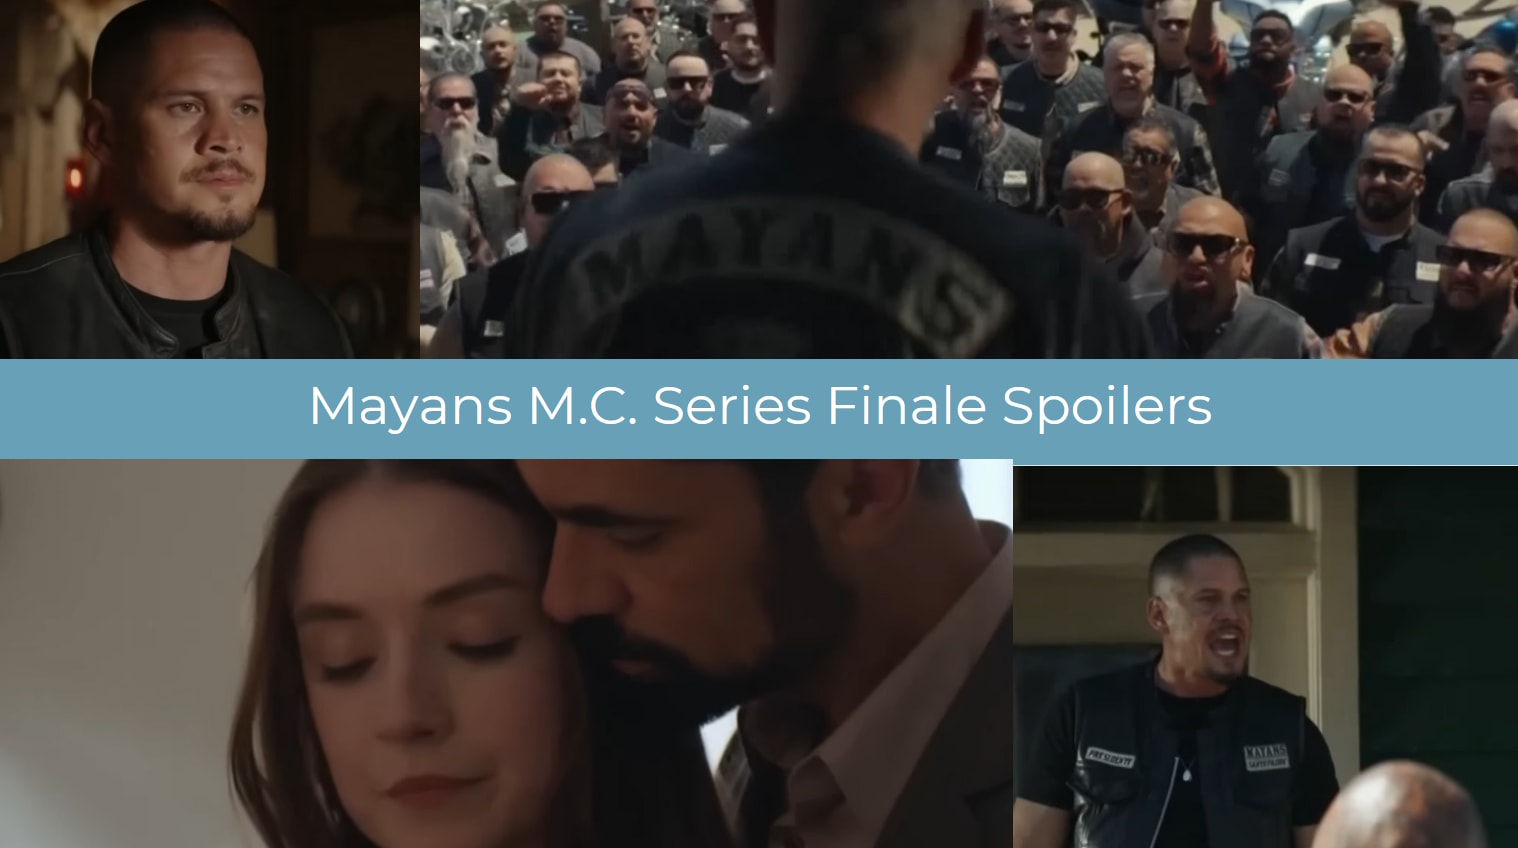 Mayans MC boss teases what's ahead after ending season 3 with a bang